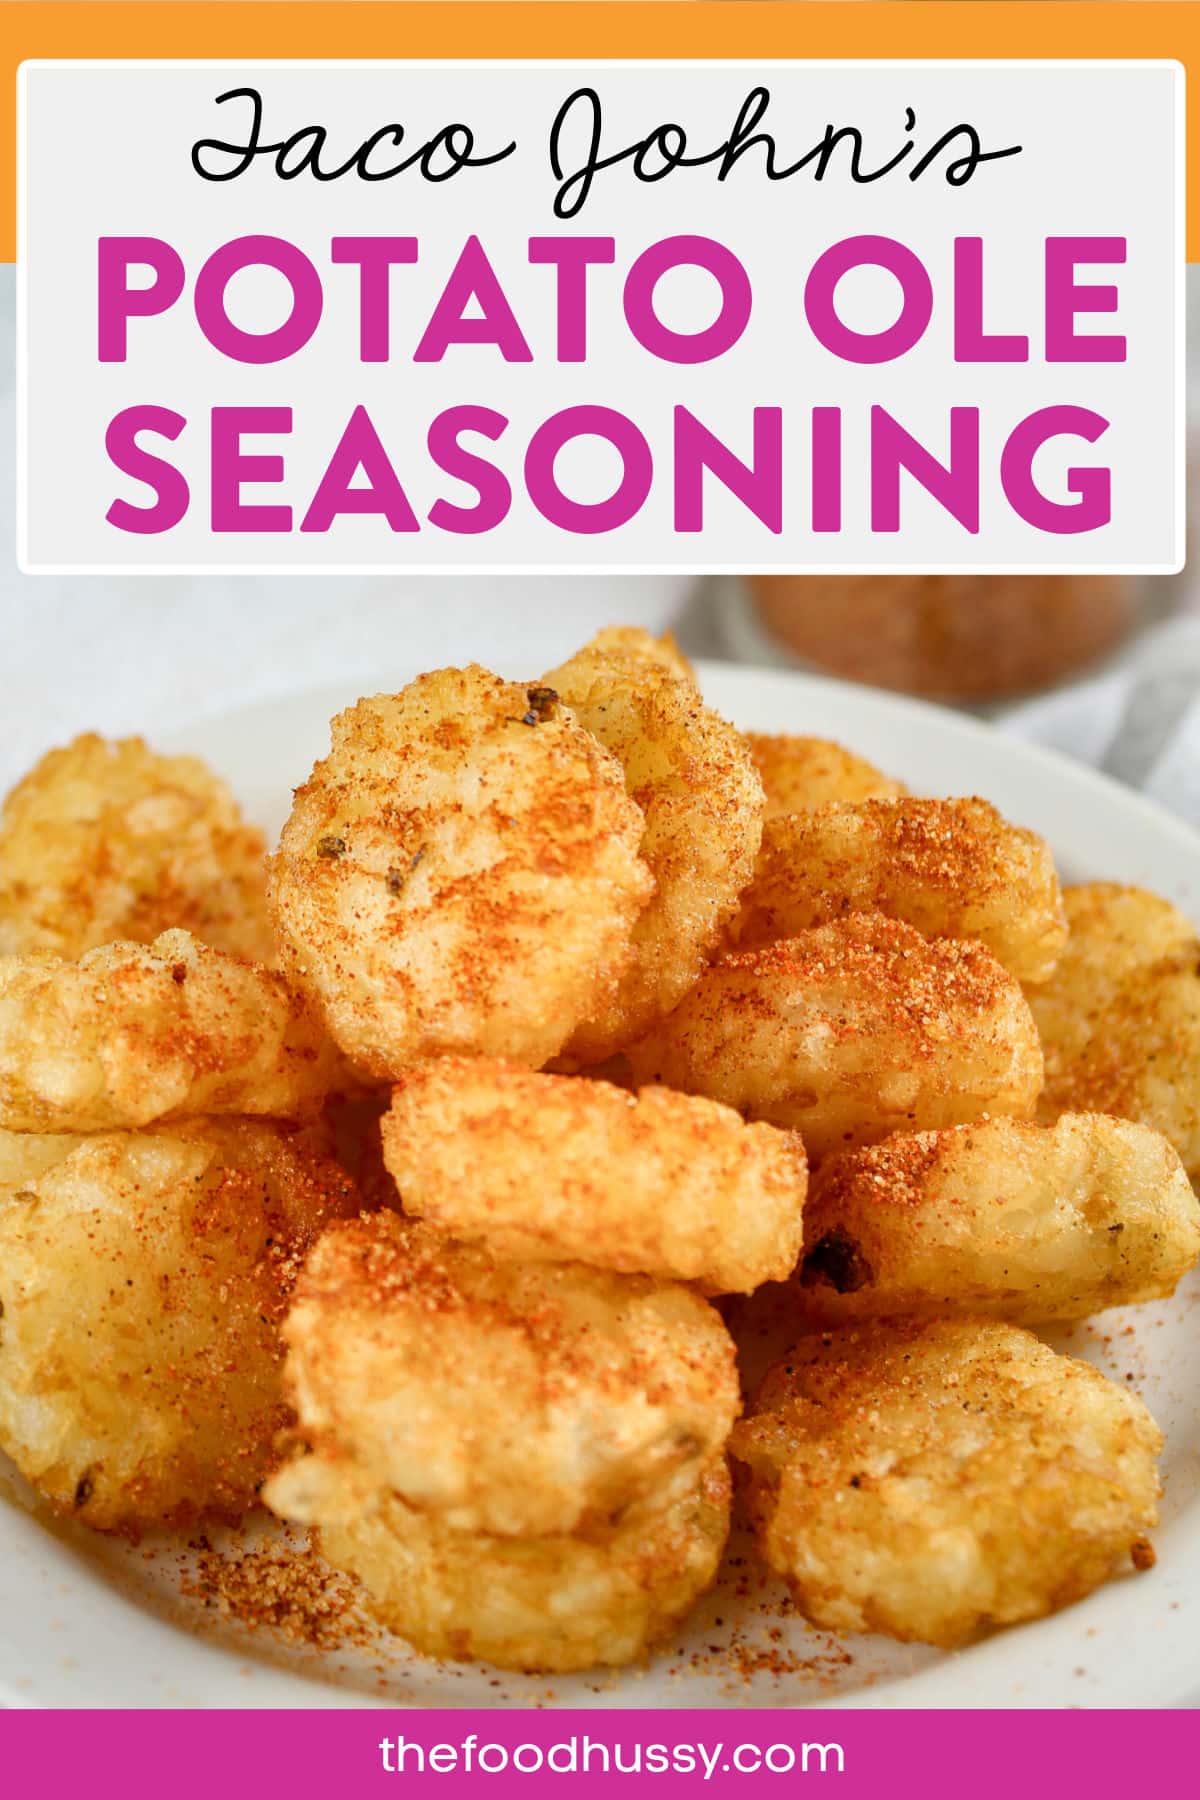 Taco Johns Potato Ole seasoning is a little spicy, a little salty and so delicious! This copycat recipe for the potato oles is spot on! via @foodhussy